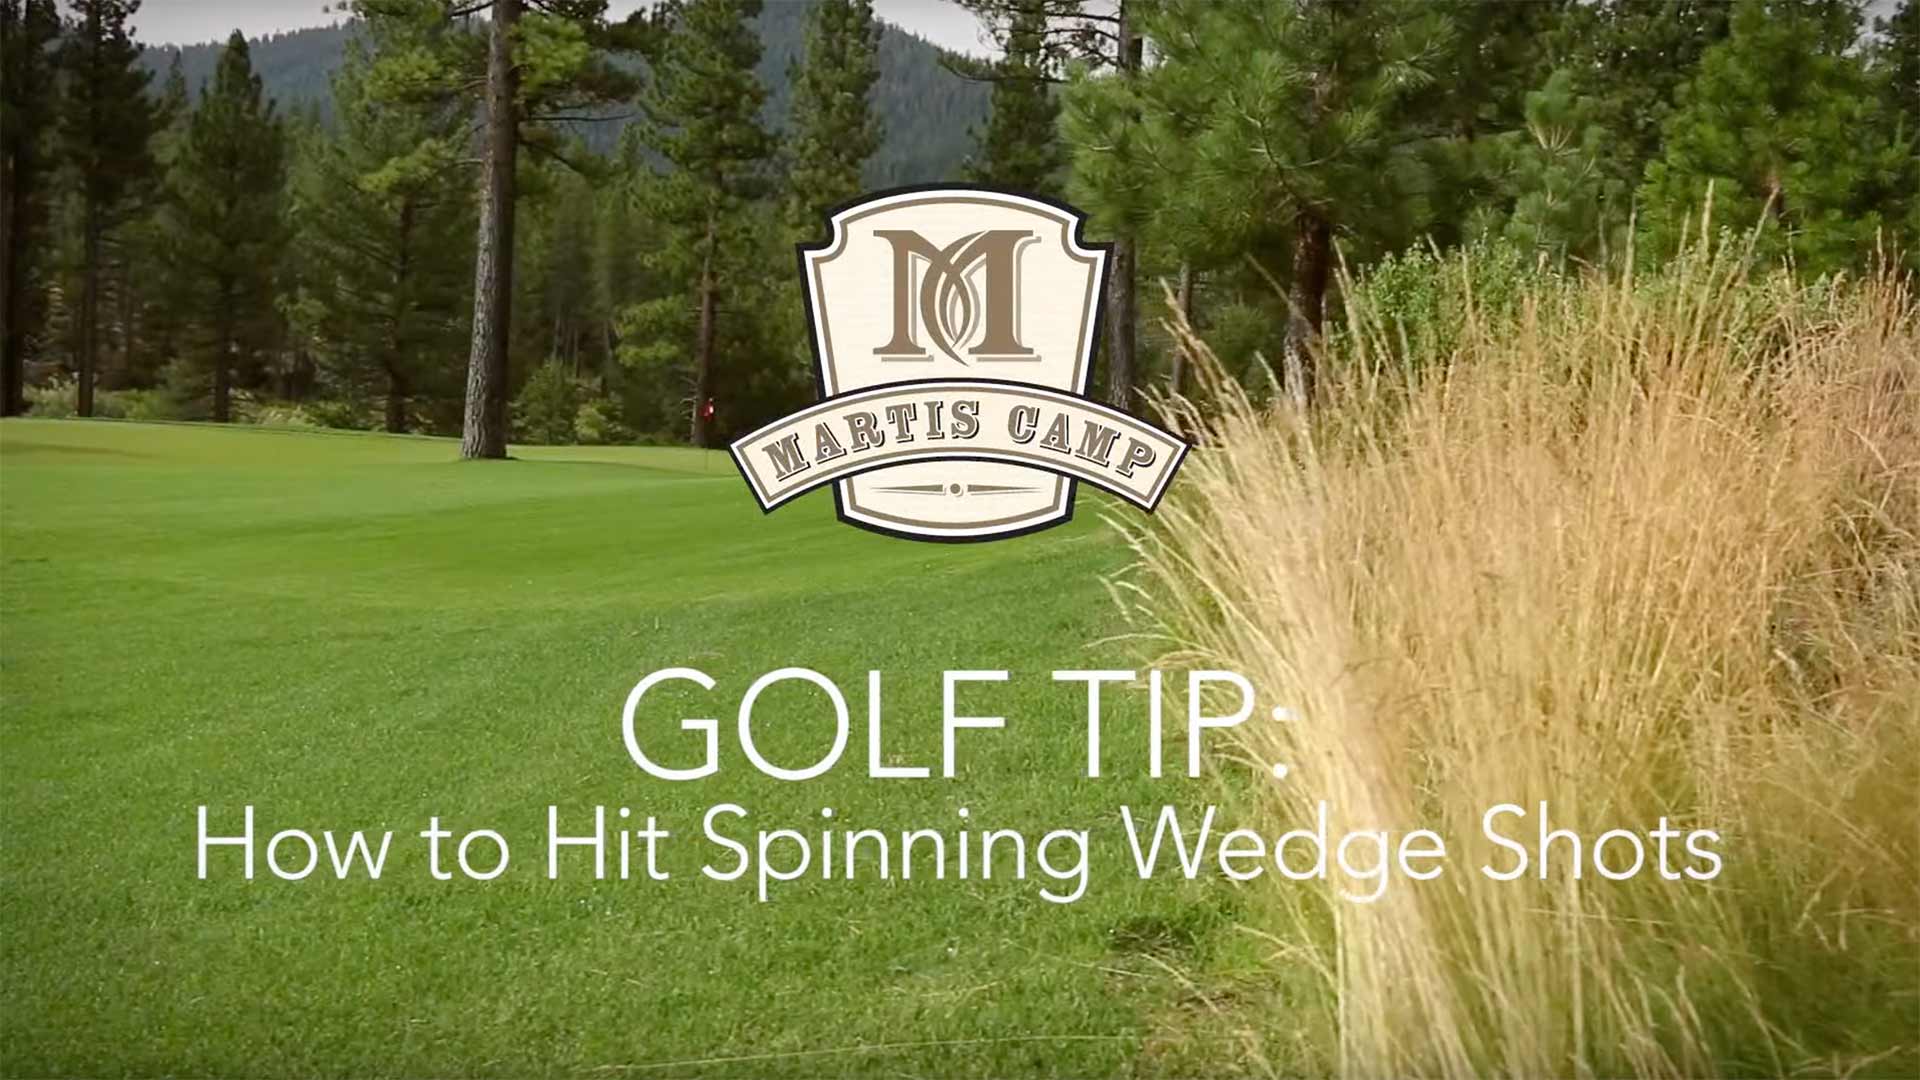 How to hit a spinning golf wedge shot